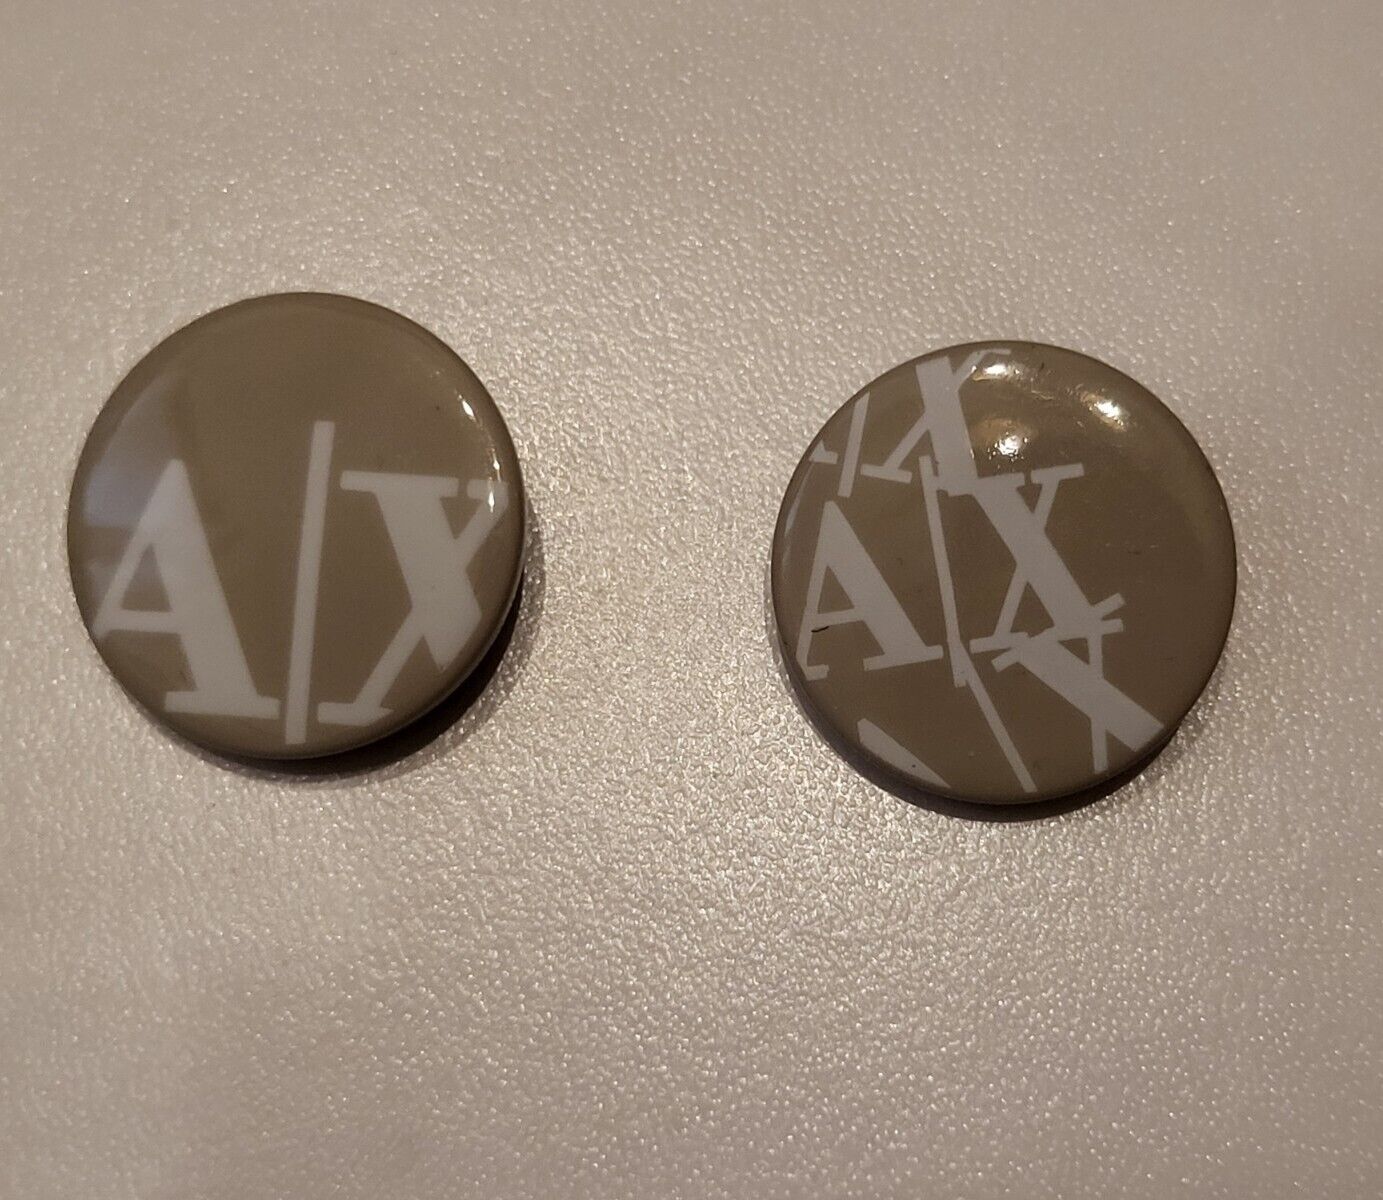 Armani Exchange A/X mini pins rare hard to find collectable Authentic 